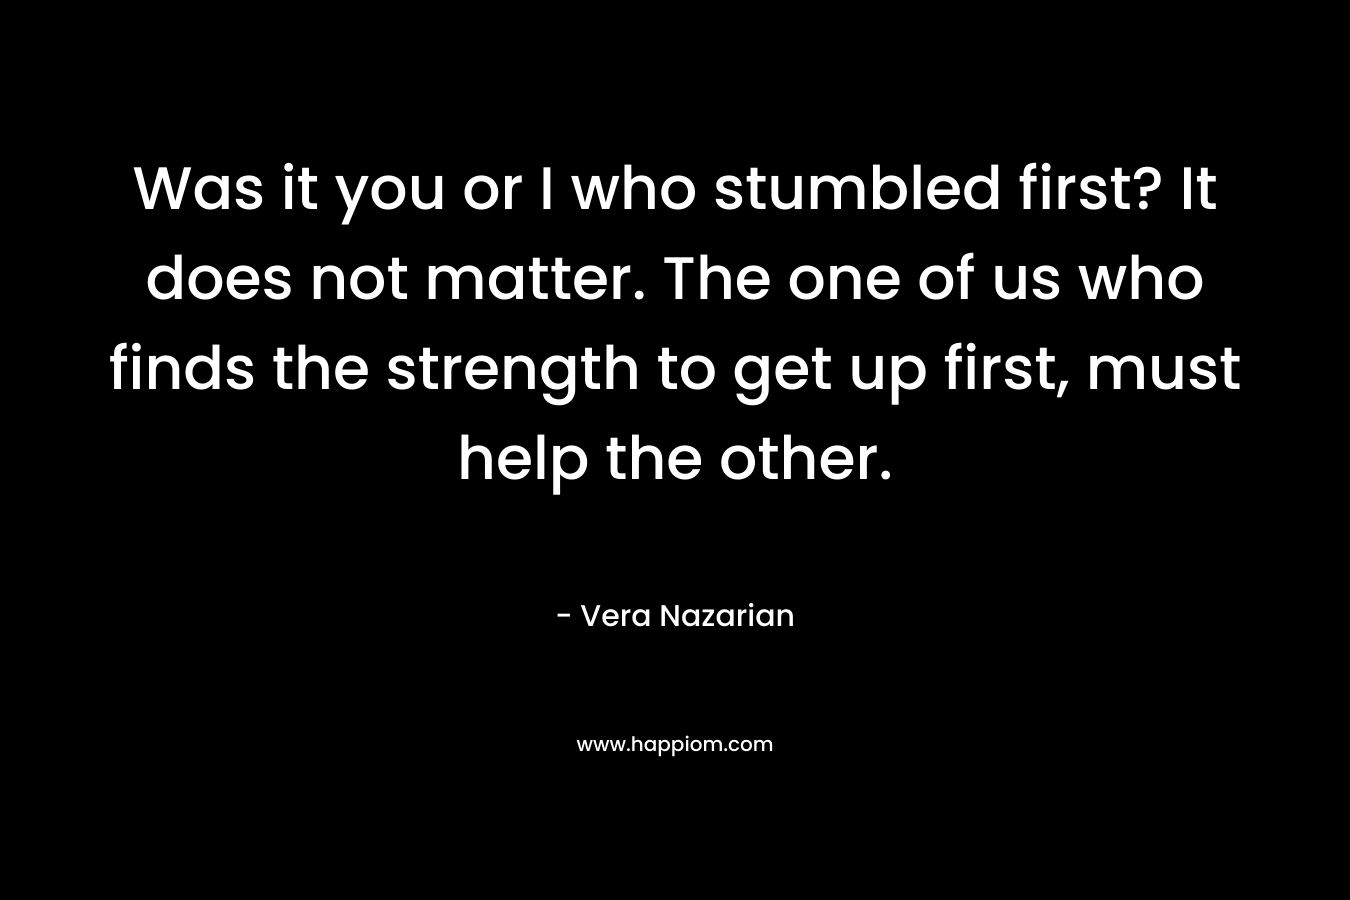 Was it you or I who stumbled first? It does not matter. The one of us who finds the strength to get up first, must help the other.